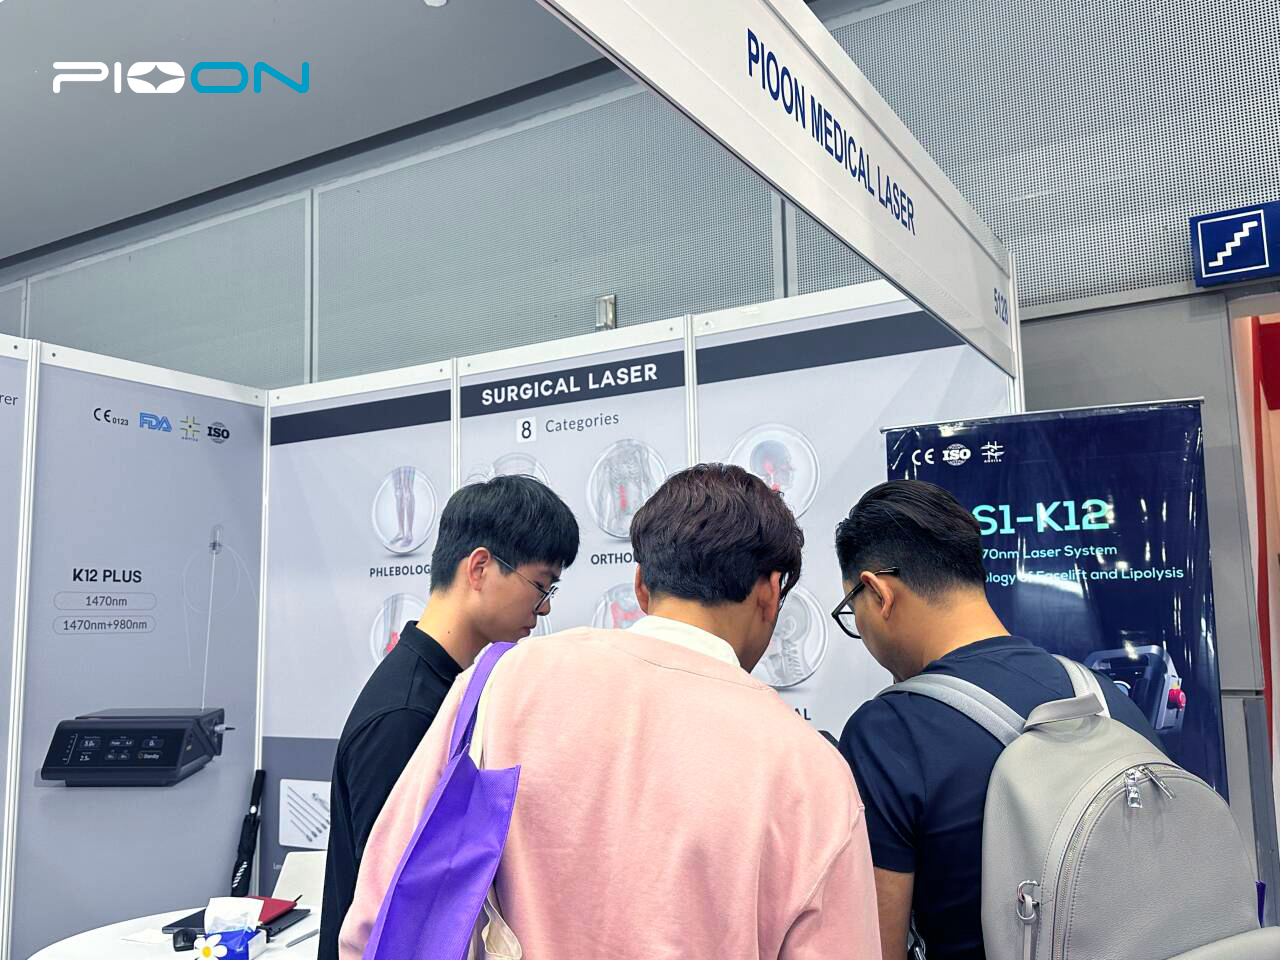 pioon laser 24th southeast asian healthcare show